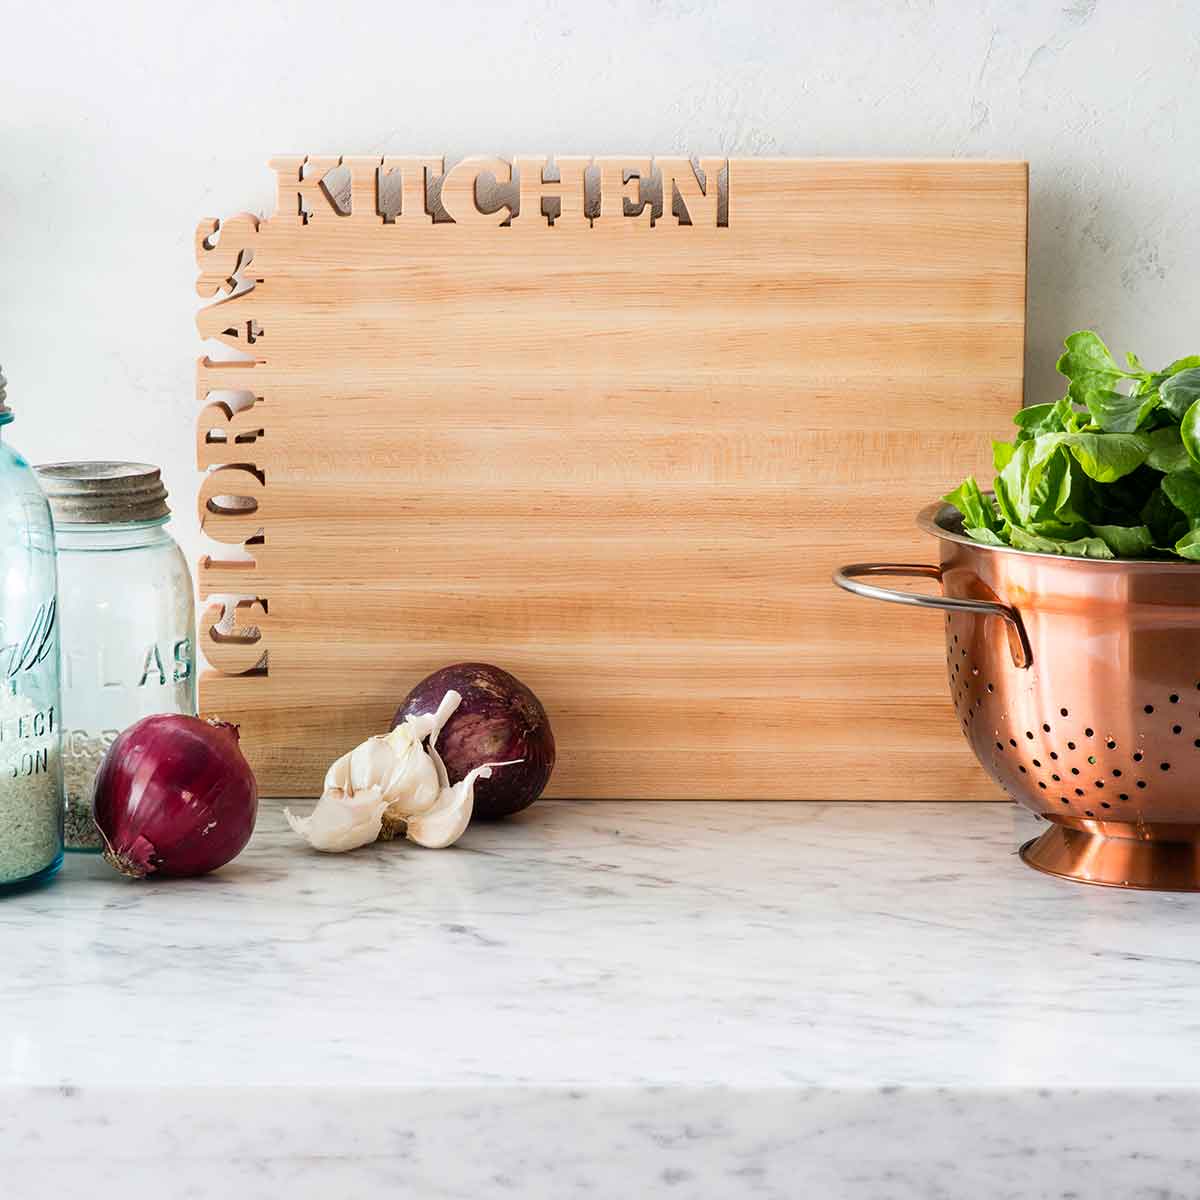 Custom Cutting Boards  Words with Boards - Words with Boards, LLC